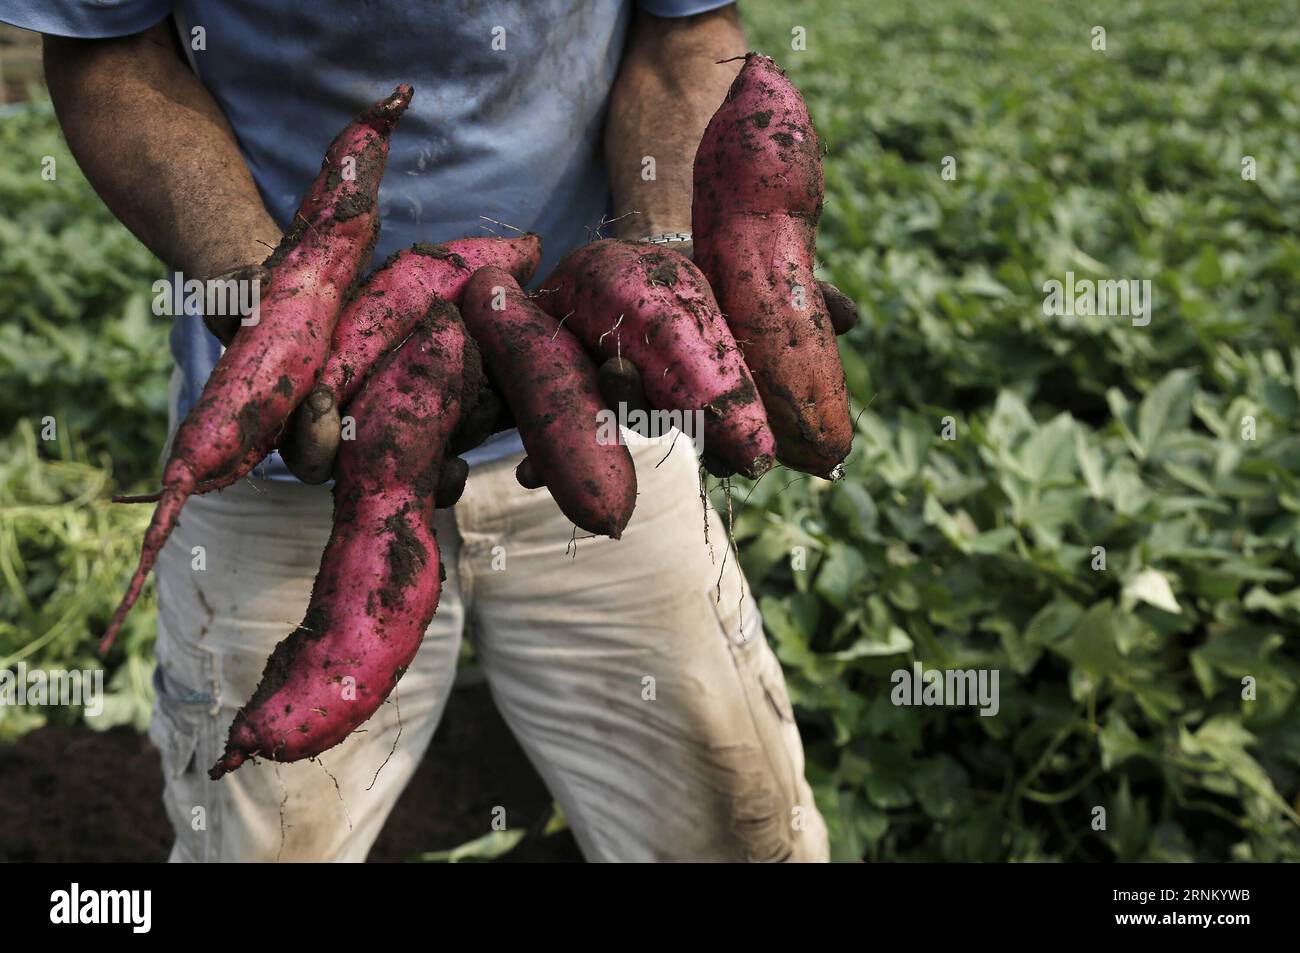 (170427) -- ALAJUELA, April 27, 2017 -- A farmer shows sweet potatoes harvested near the Poas Volcano, in Alajuela Province, Costa Rica, on April 26, 2017. According to local press, Costa Rica s President Luis Guillermo Solis called people on Monday to support the stores, farmers and tourism in the zones close to the Poas Volcano. Costa Rica s National System of Conservation Areas announced that the Poas Volcano National Park will remain closed for undefined time, because the activity of the volcano has increased. ) (fnc) (gj) COSTA RICA-ALAJUELA-VOLCANO KENTxGILBERT PUBLICATIONxNOTxINxCHN   A Stock Photo